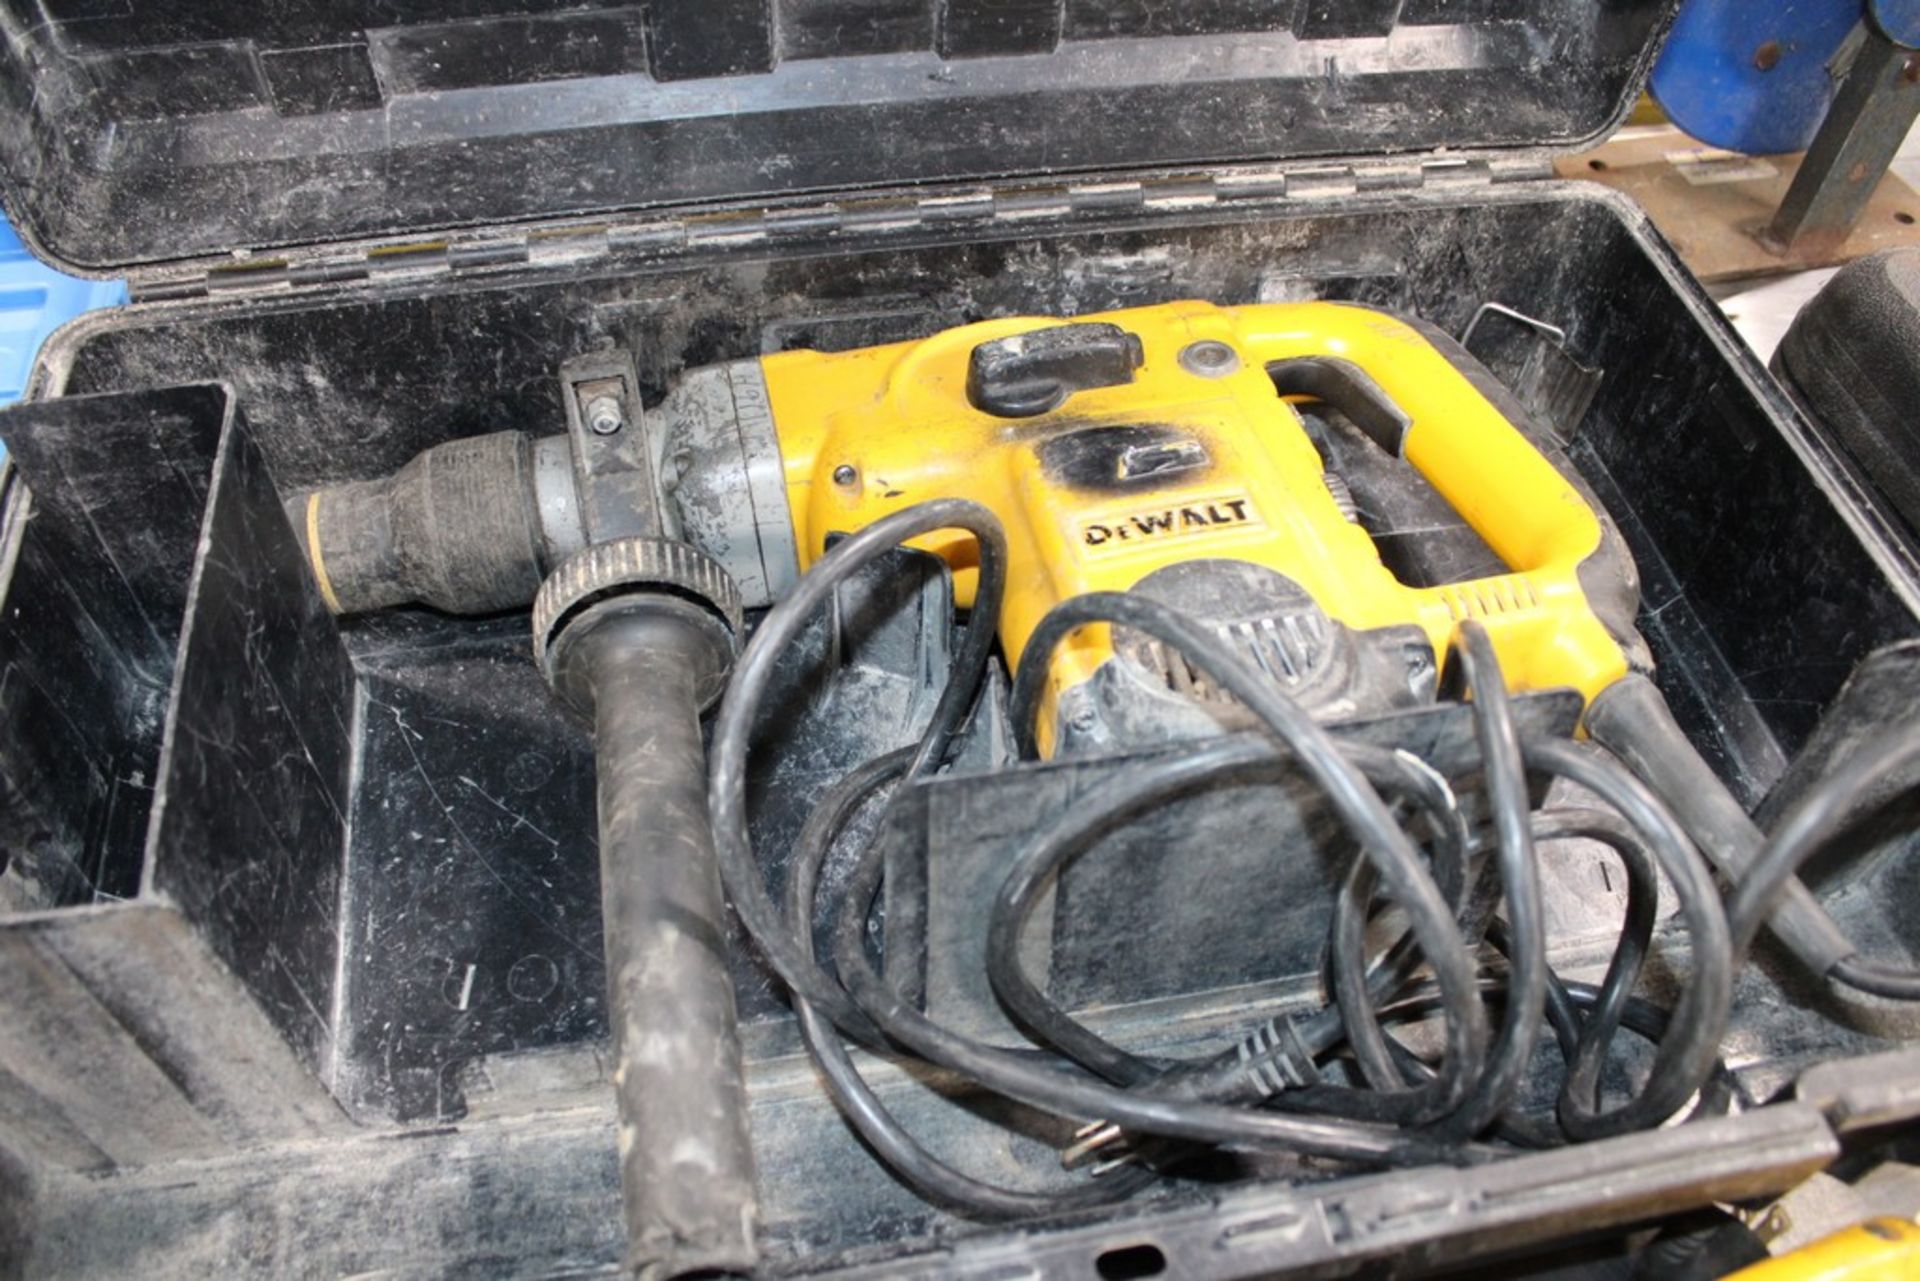 DEWALT MODEL D25600 1-3/4" ROTARY HAMMER DRILL WITH CASE